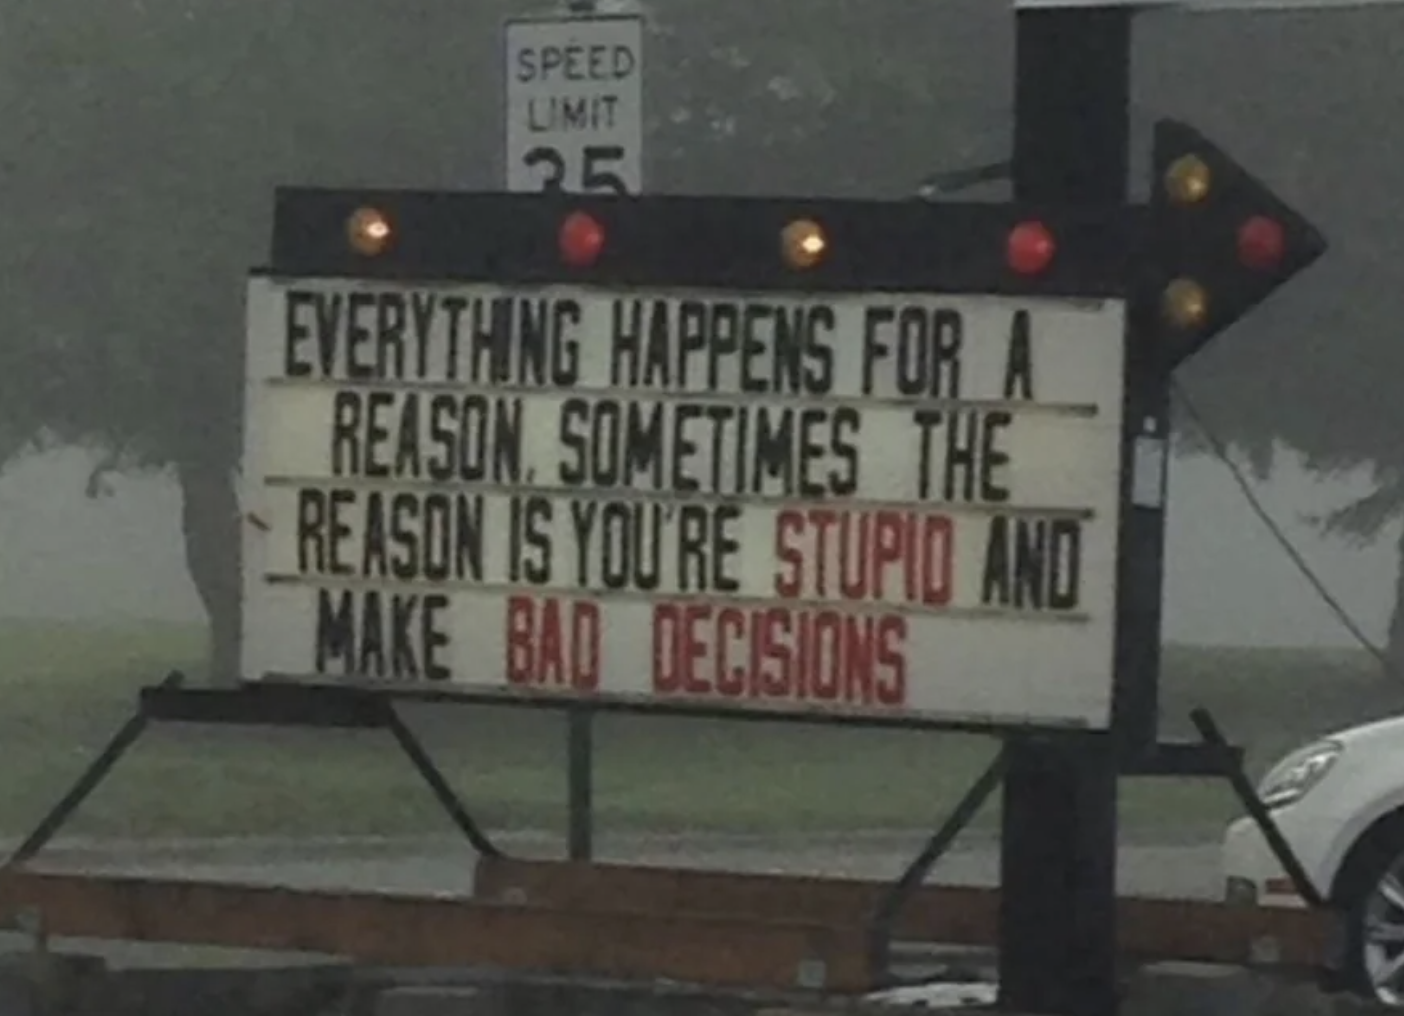 Store sign: &quot;Everything happens for a reason, sometimes the reason is you&#x27;re stupid and make bad decisions&quot;